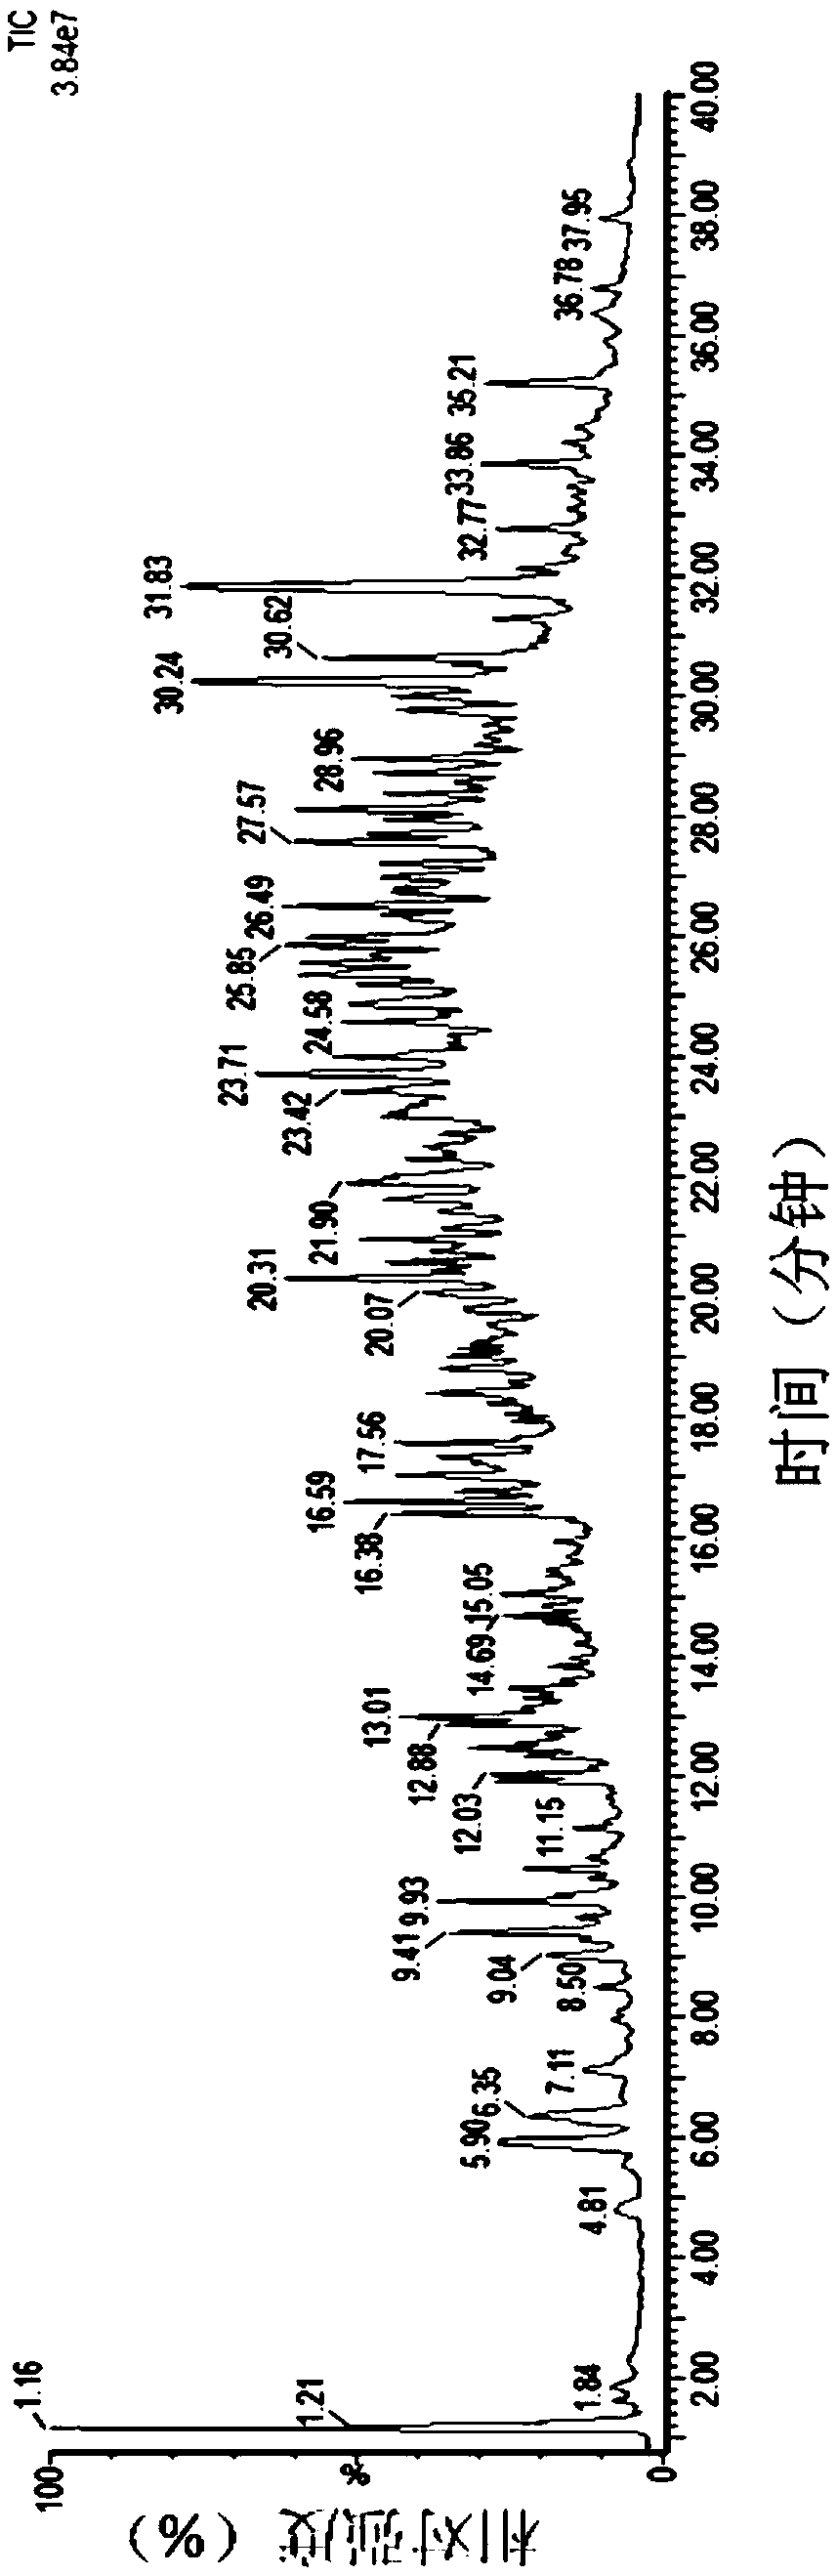 Sulfated heparin oligosaccharide as well as preparation method and application thereof